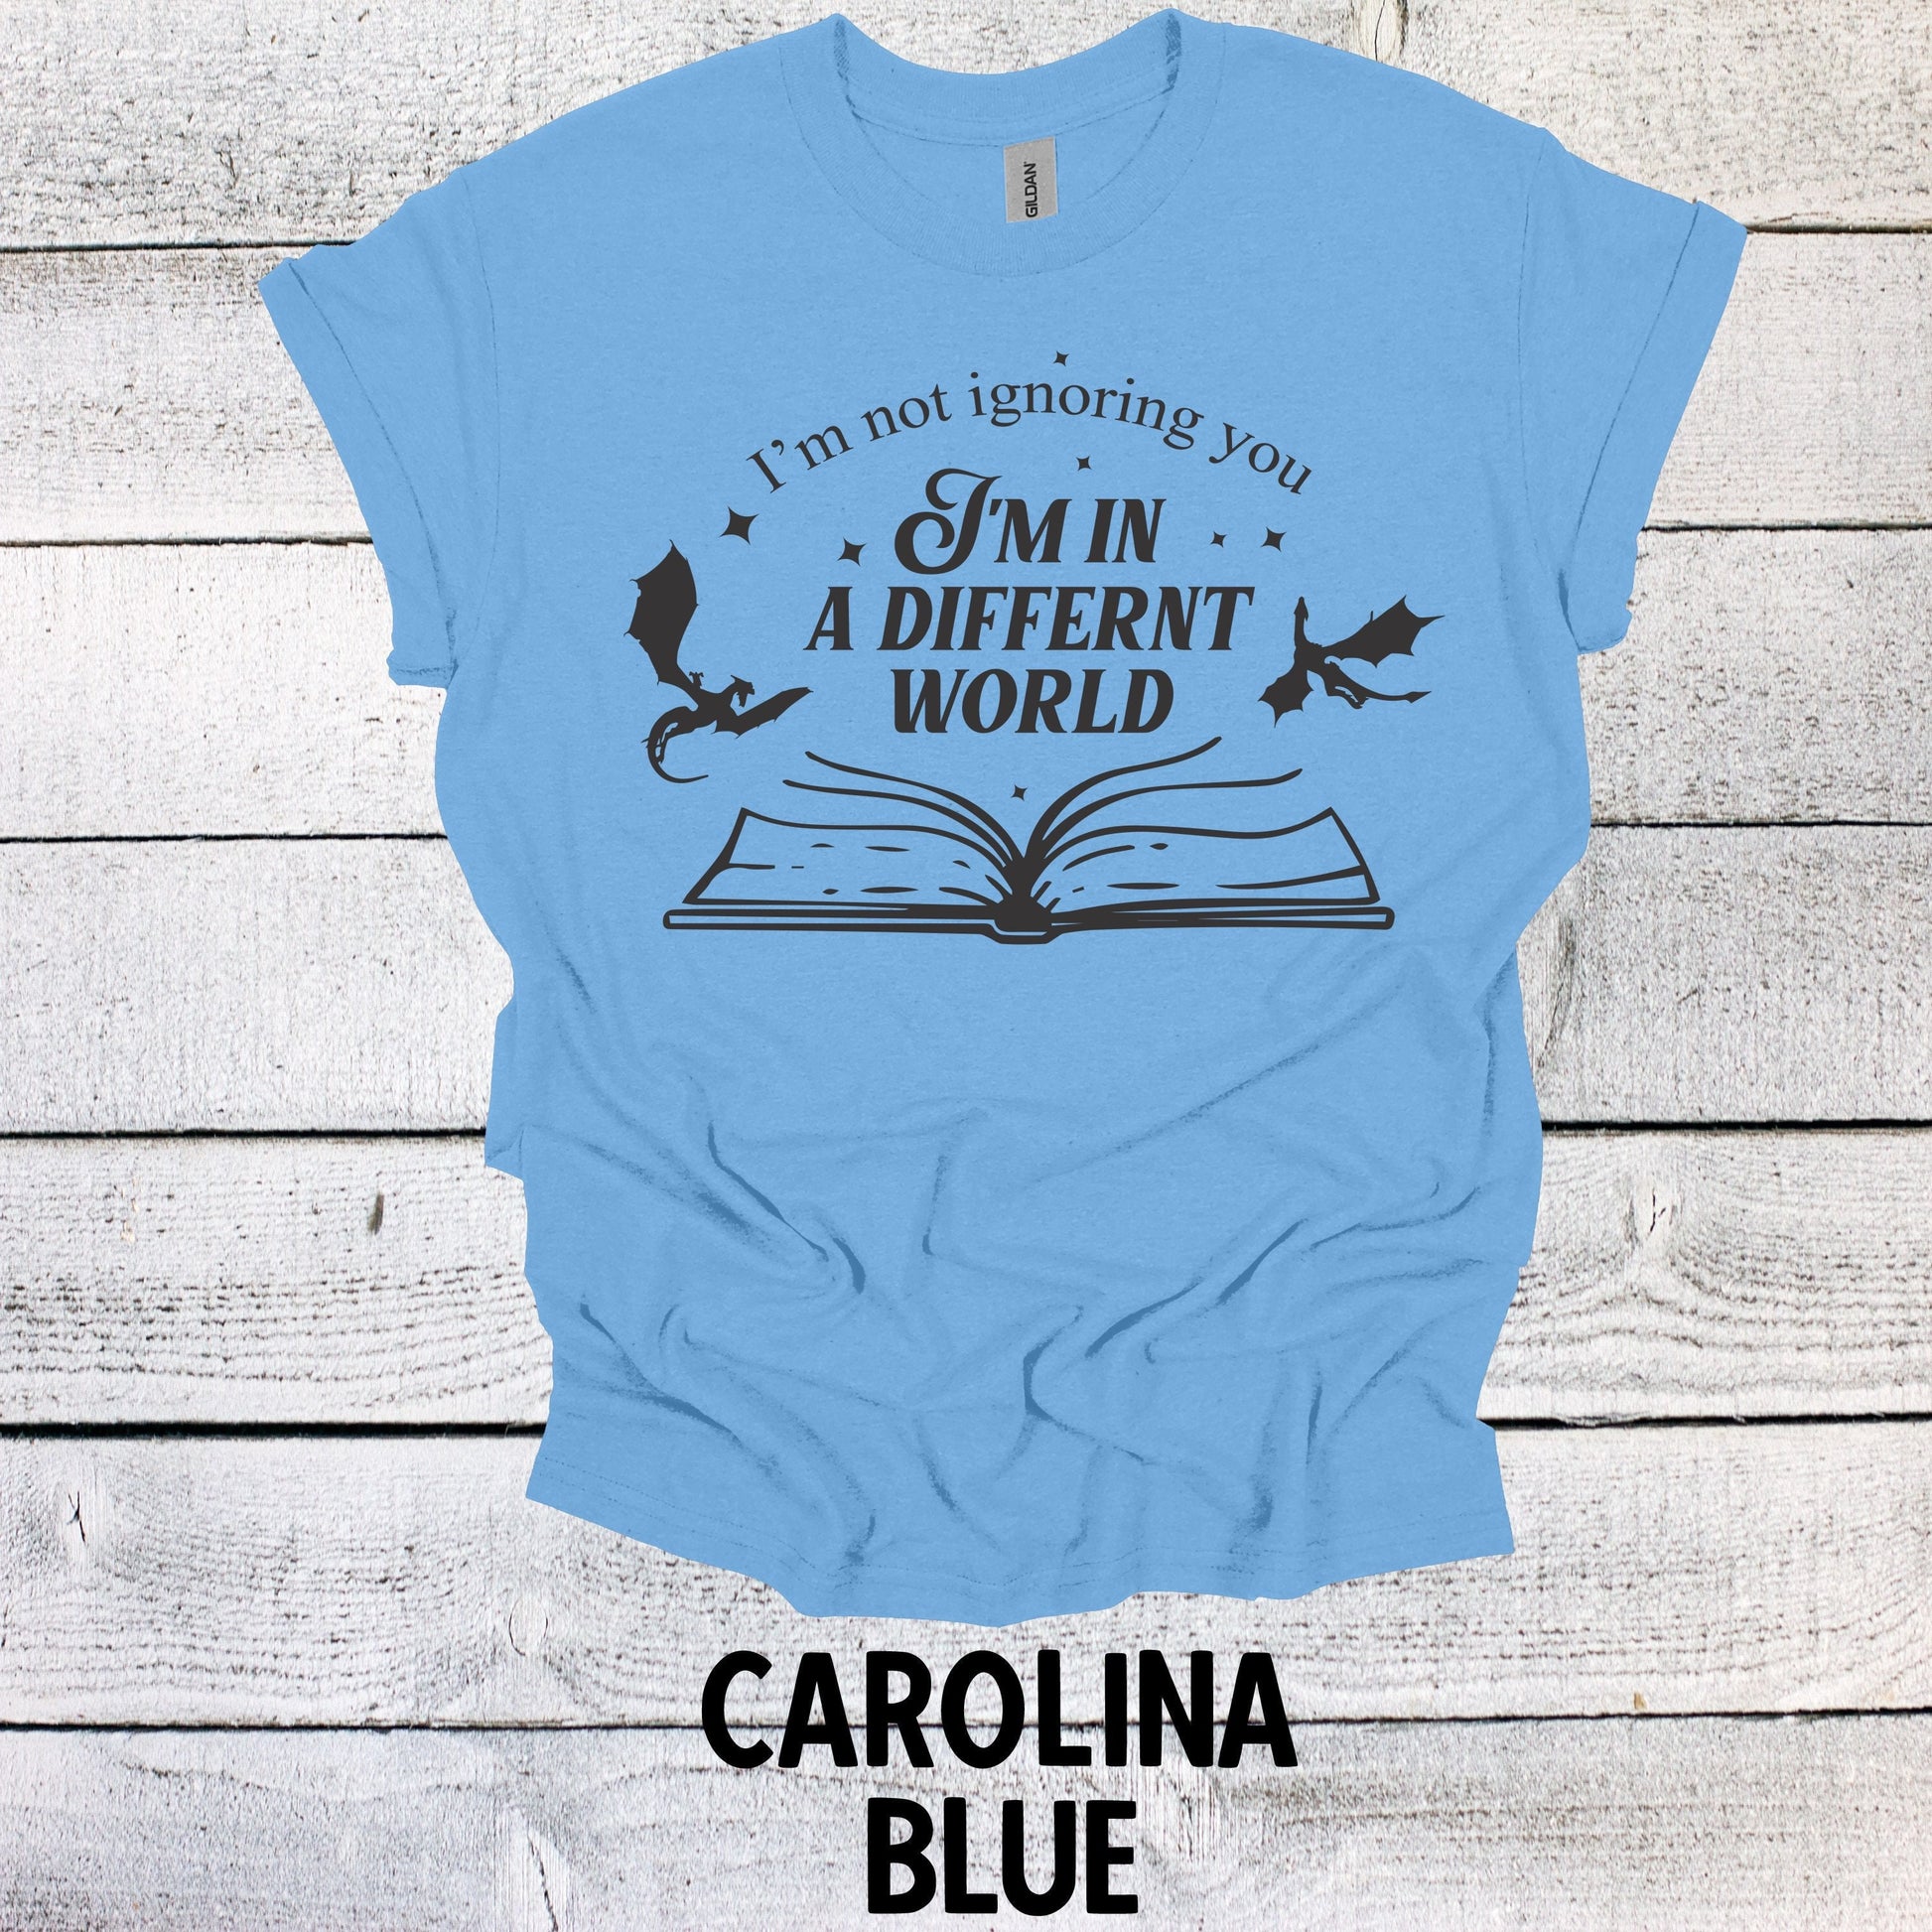 Unique Reading T-Shirt: Not Ignoring You, Just Lost in a Different World